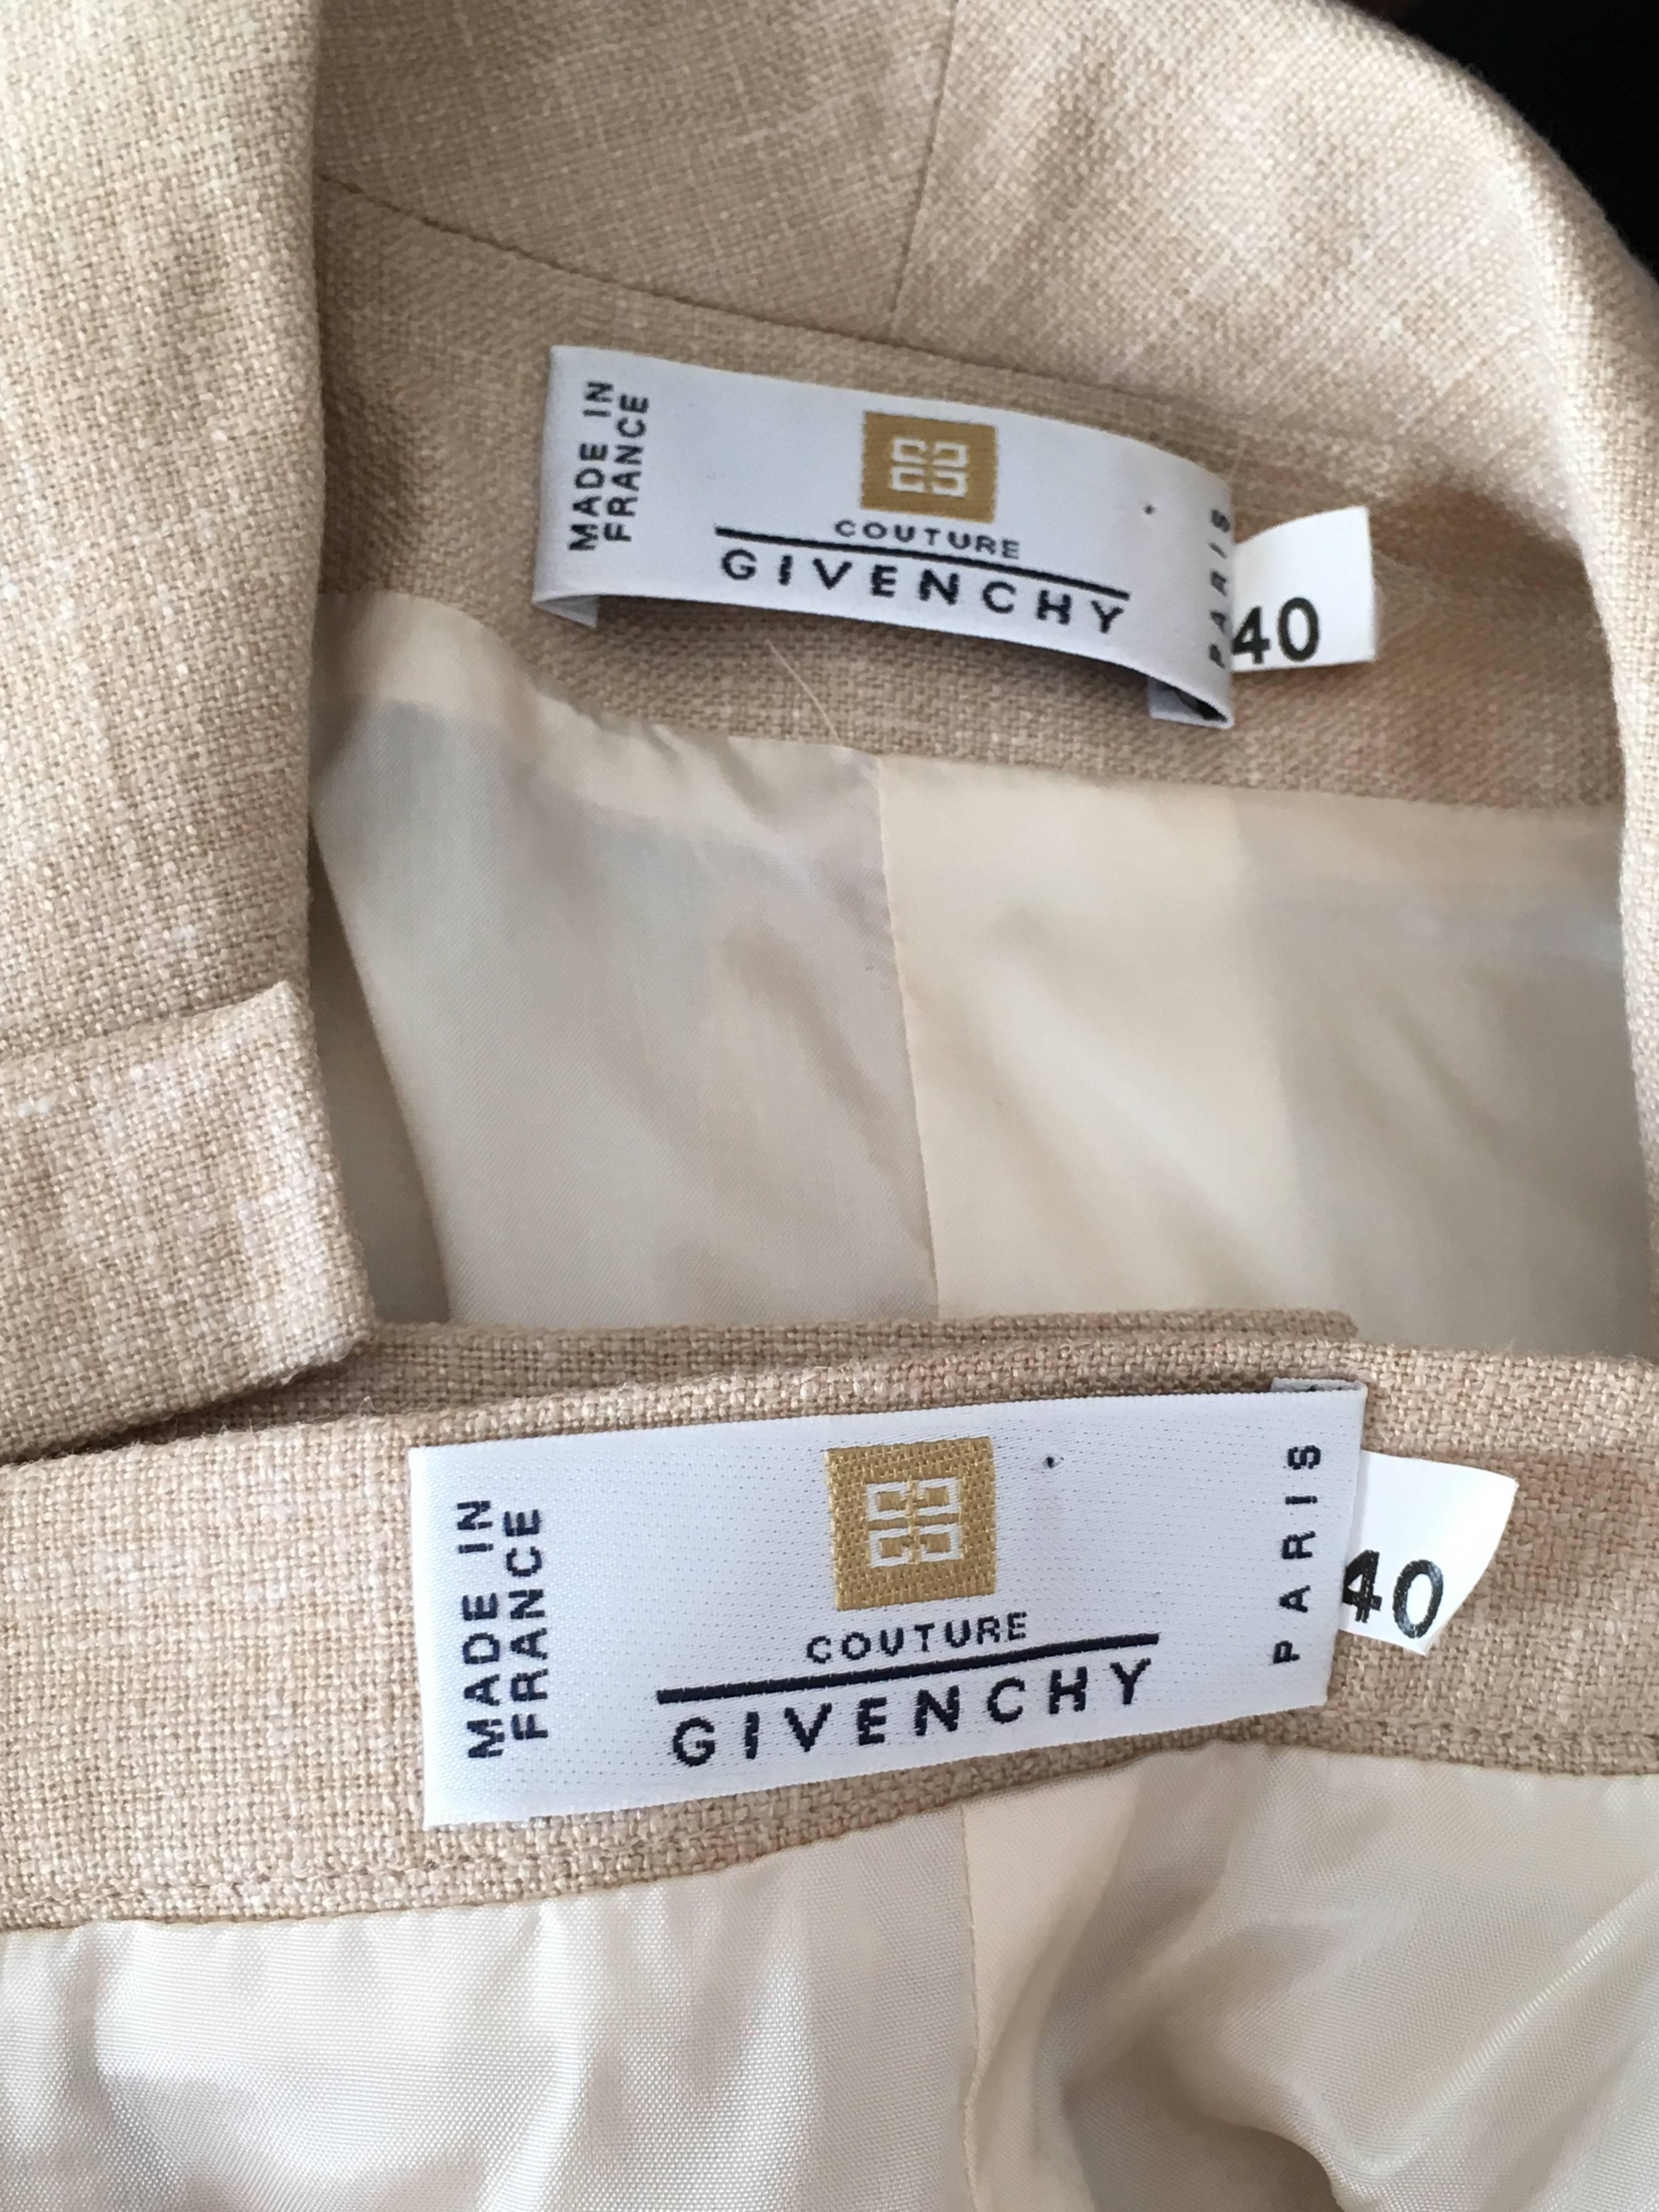 Givenchy Couture 1990s Tan Jacket & Skirt Set Size 6. 5